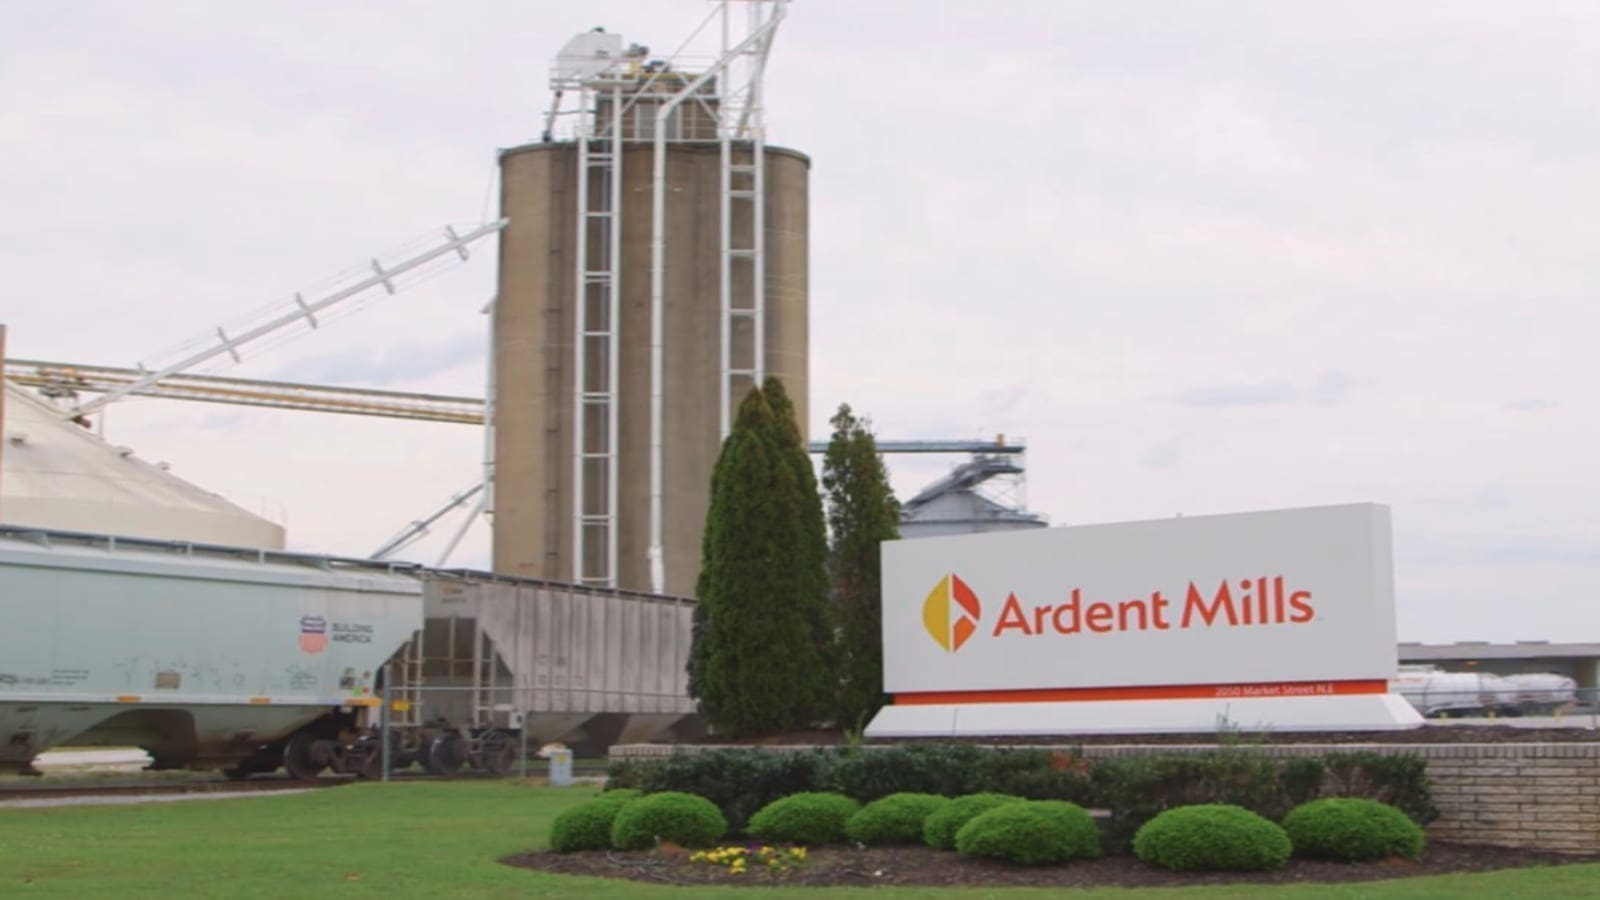 Conagra Brands delivers on Q3 goals thanks to strong performance from Ardent Mills  